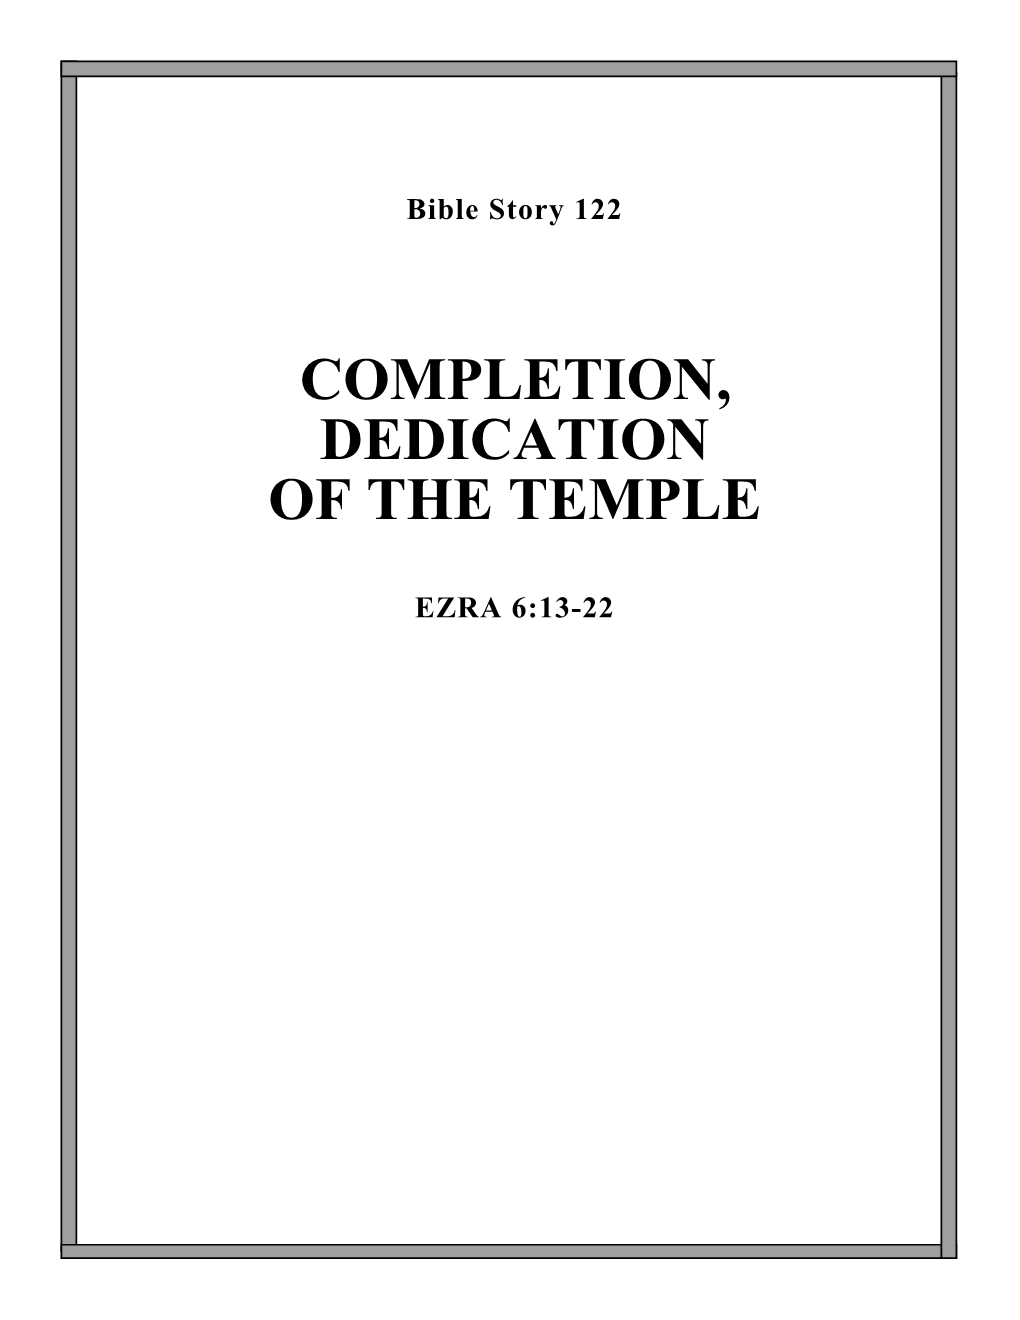 Completion, Dedication of the Temple